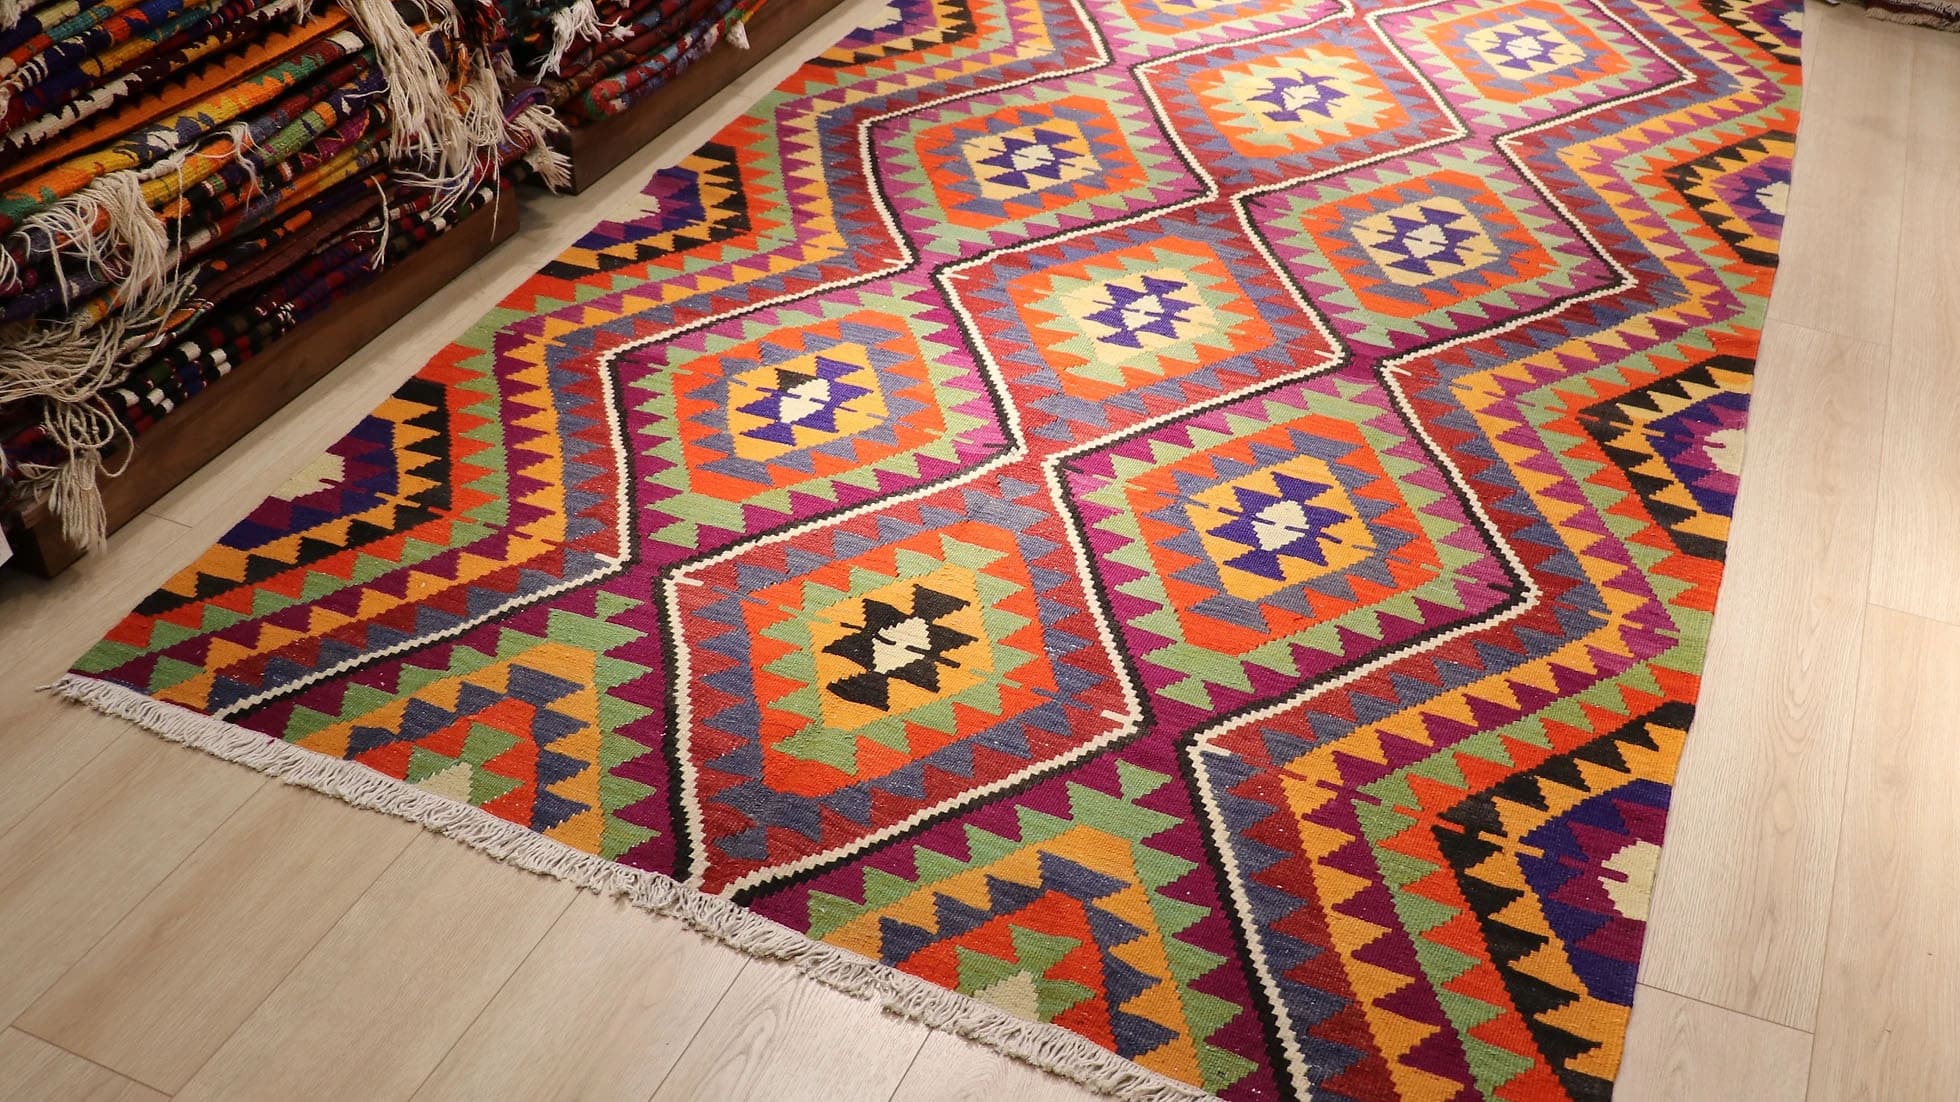 a beautiful handwoven Turkish kilim rug in traditional and tribal motifs made by nomadic women weavers 